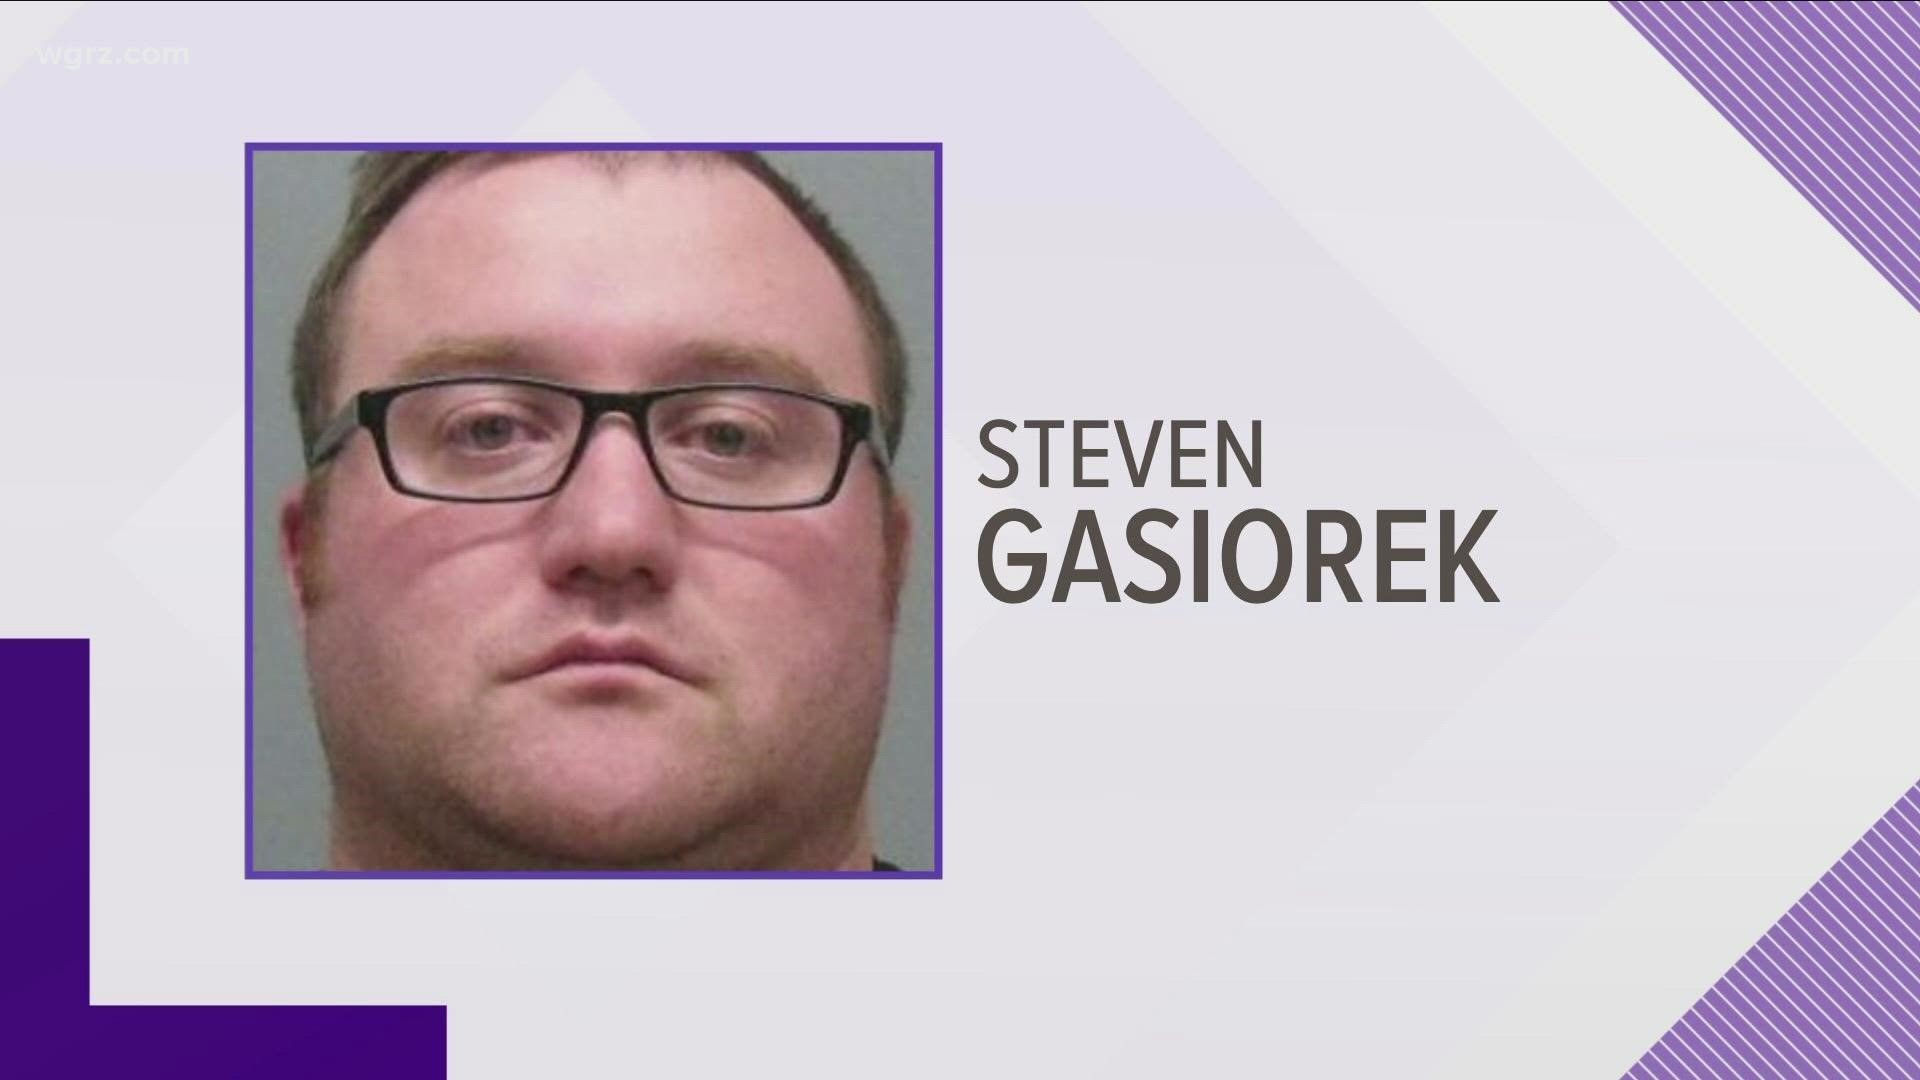 Gasiorek pleaded guilty to receiving and possessing child porn... he'll get at least 5 and up to 40 years in prison when he's sentenced in July.